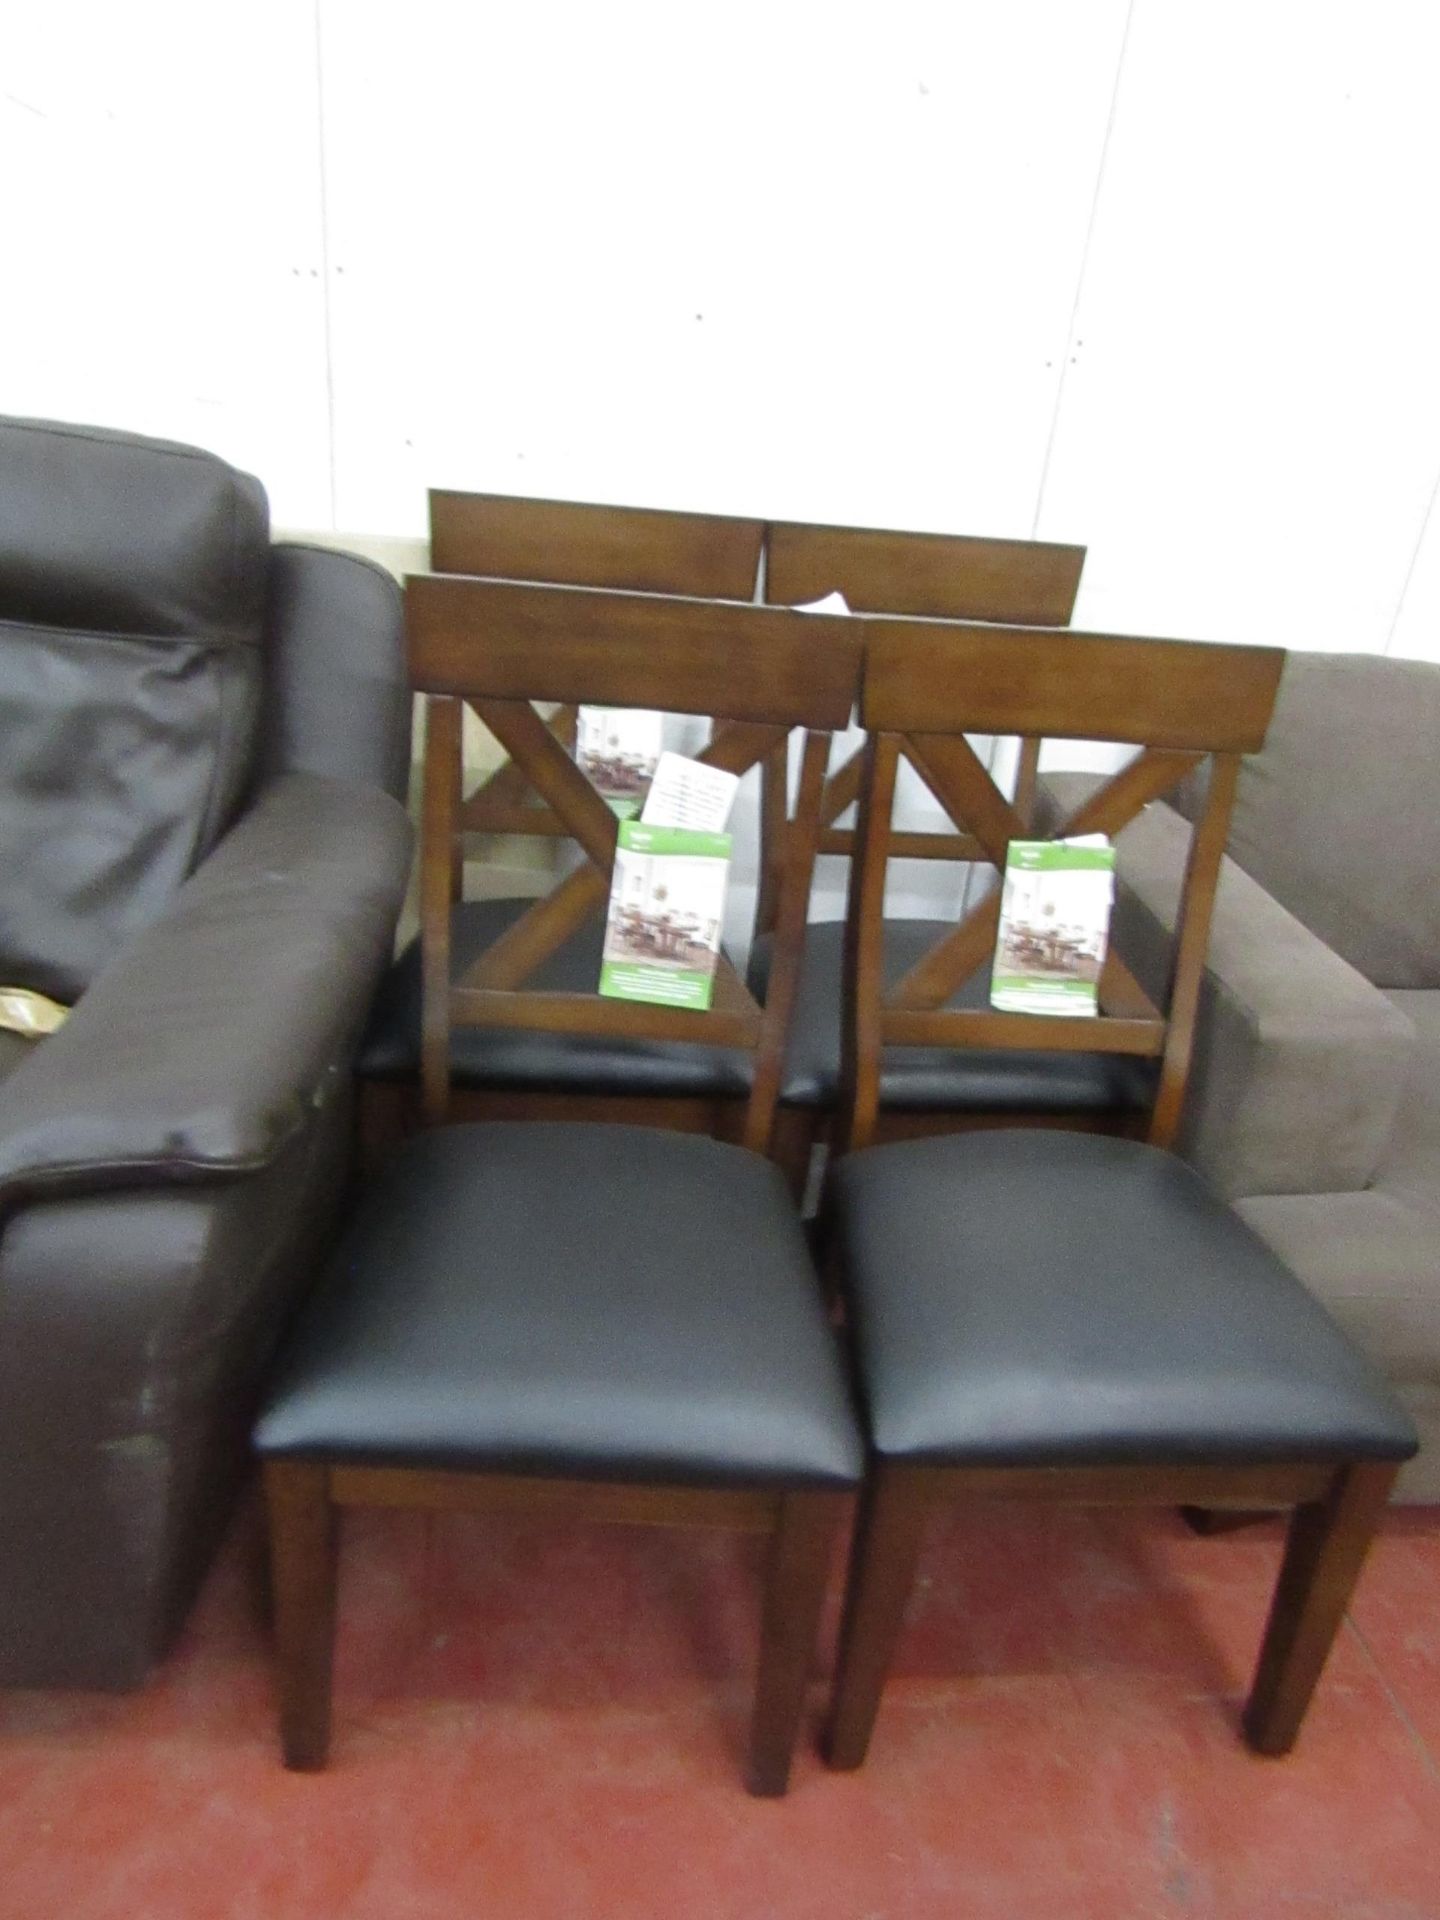 4 x Bayside furnishings Dinning Chairs, new with tags